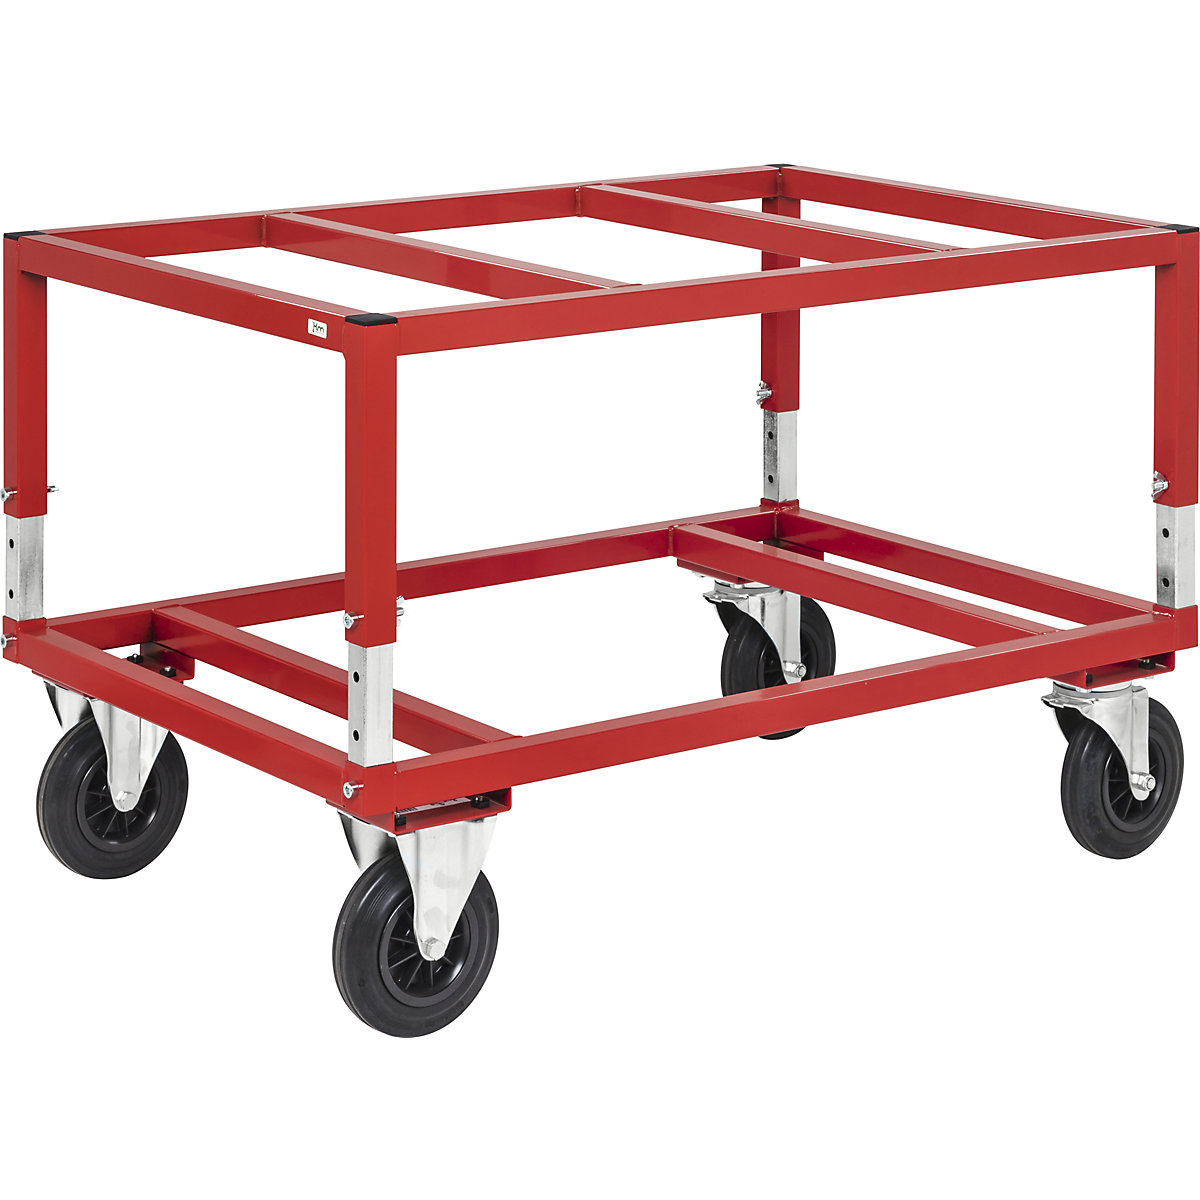 KM222 pallet dolly – Kongamek, LxWxH 1200 x 1000 x 655 – 830 mm, red, 2 swivel castors with stops, 2 fixed castors, 5+ items-2